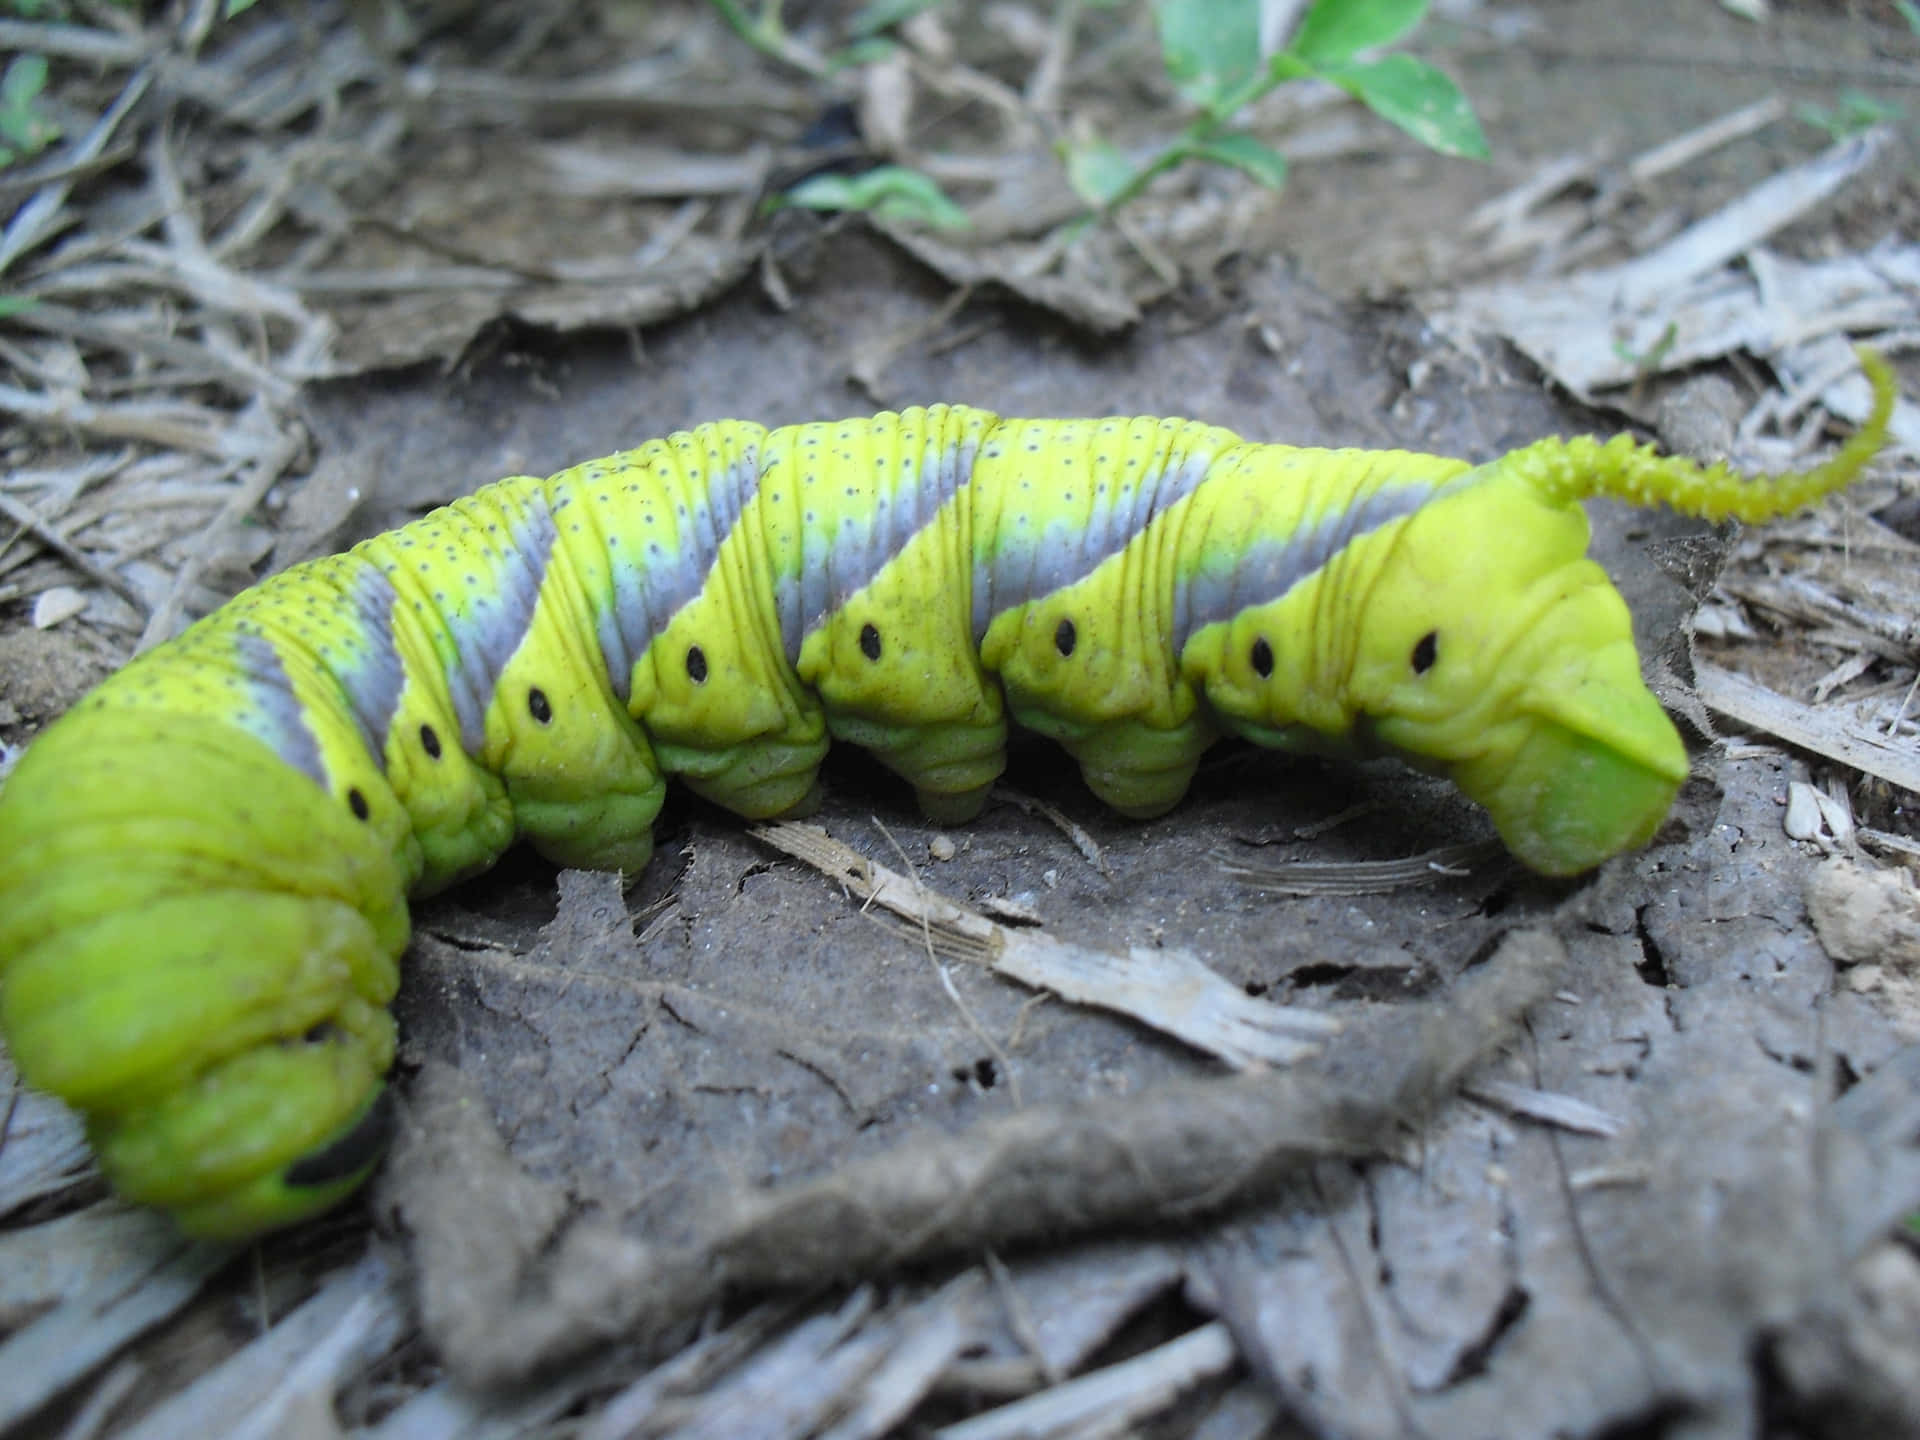 "Powering The World - The Mighty Caterpillar"